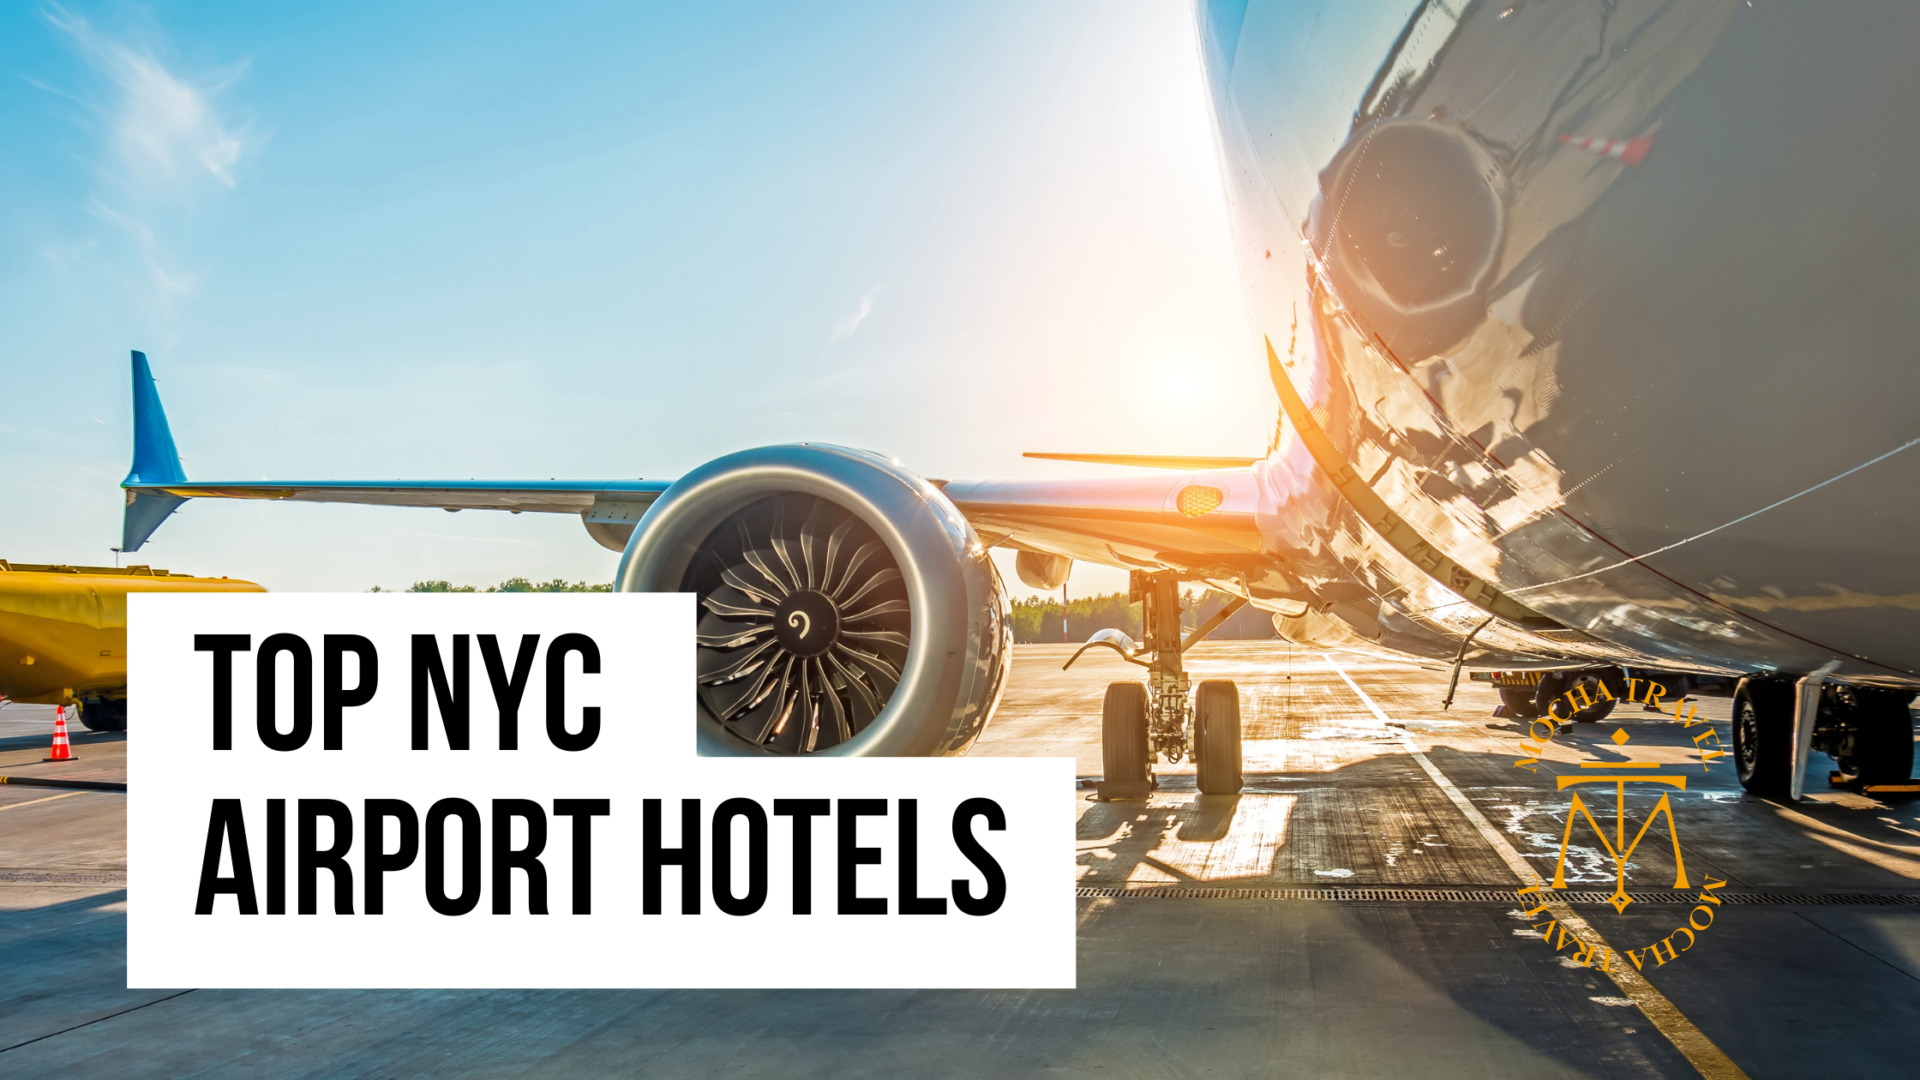 Top NYC Airport Hotels